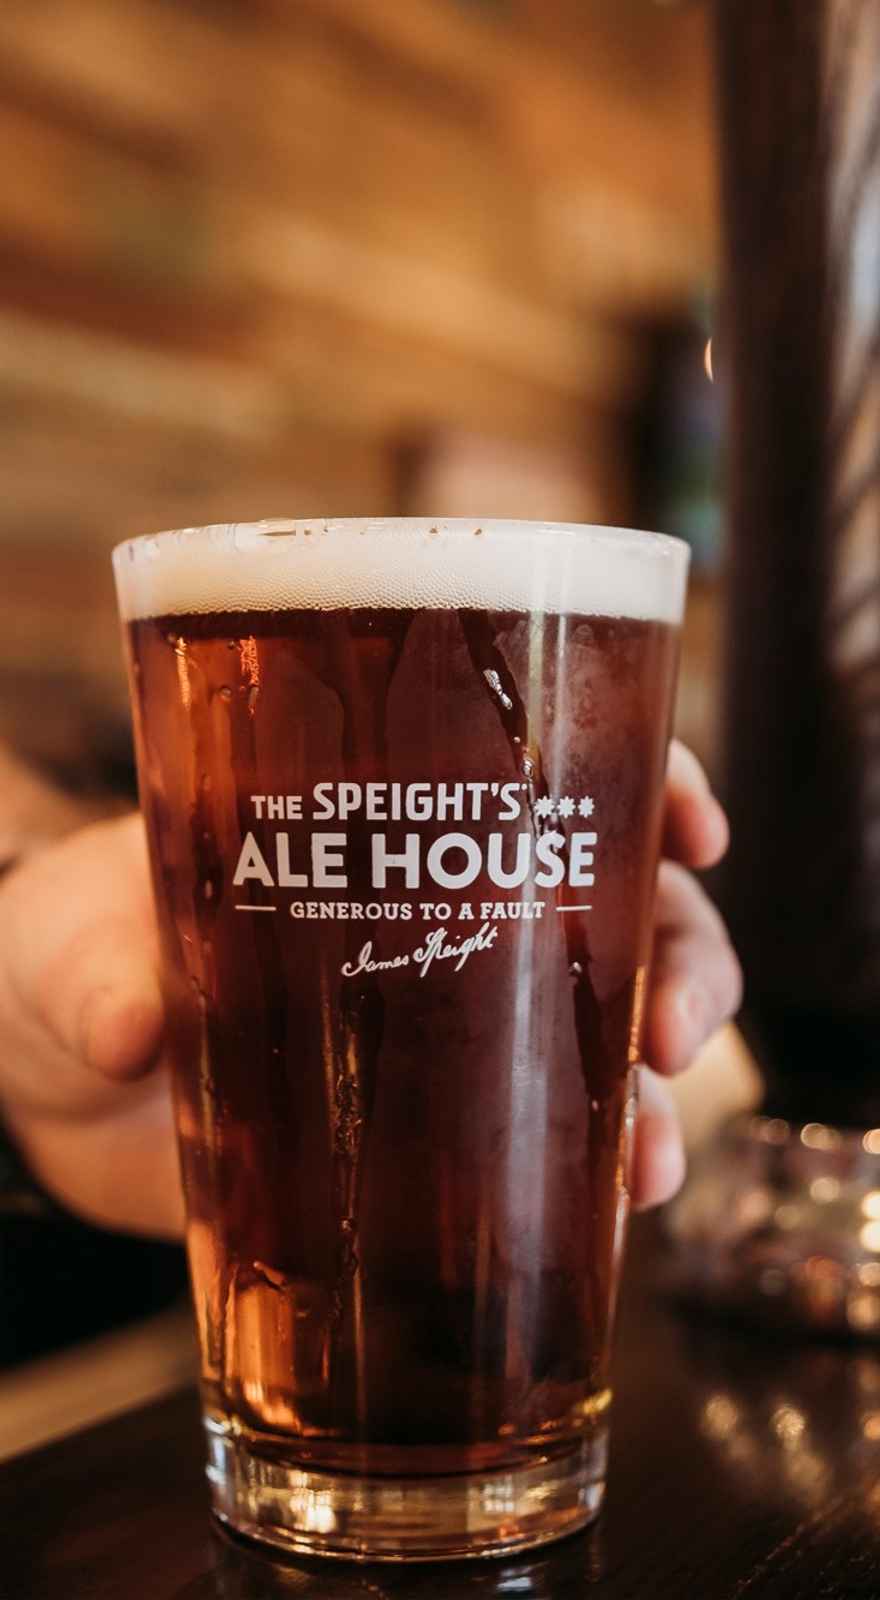 The Speight's Ale House, Petone